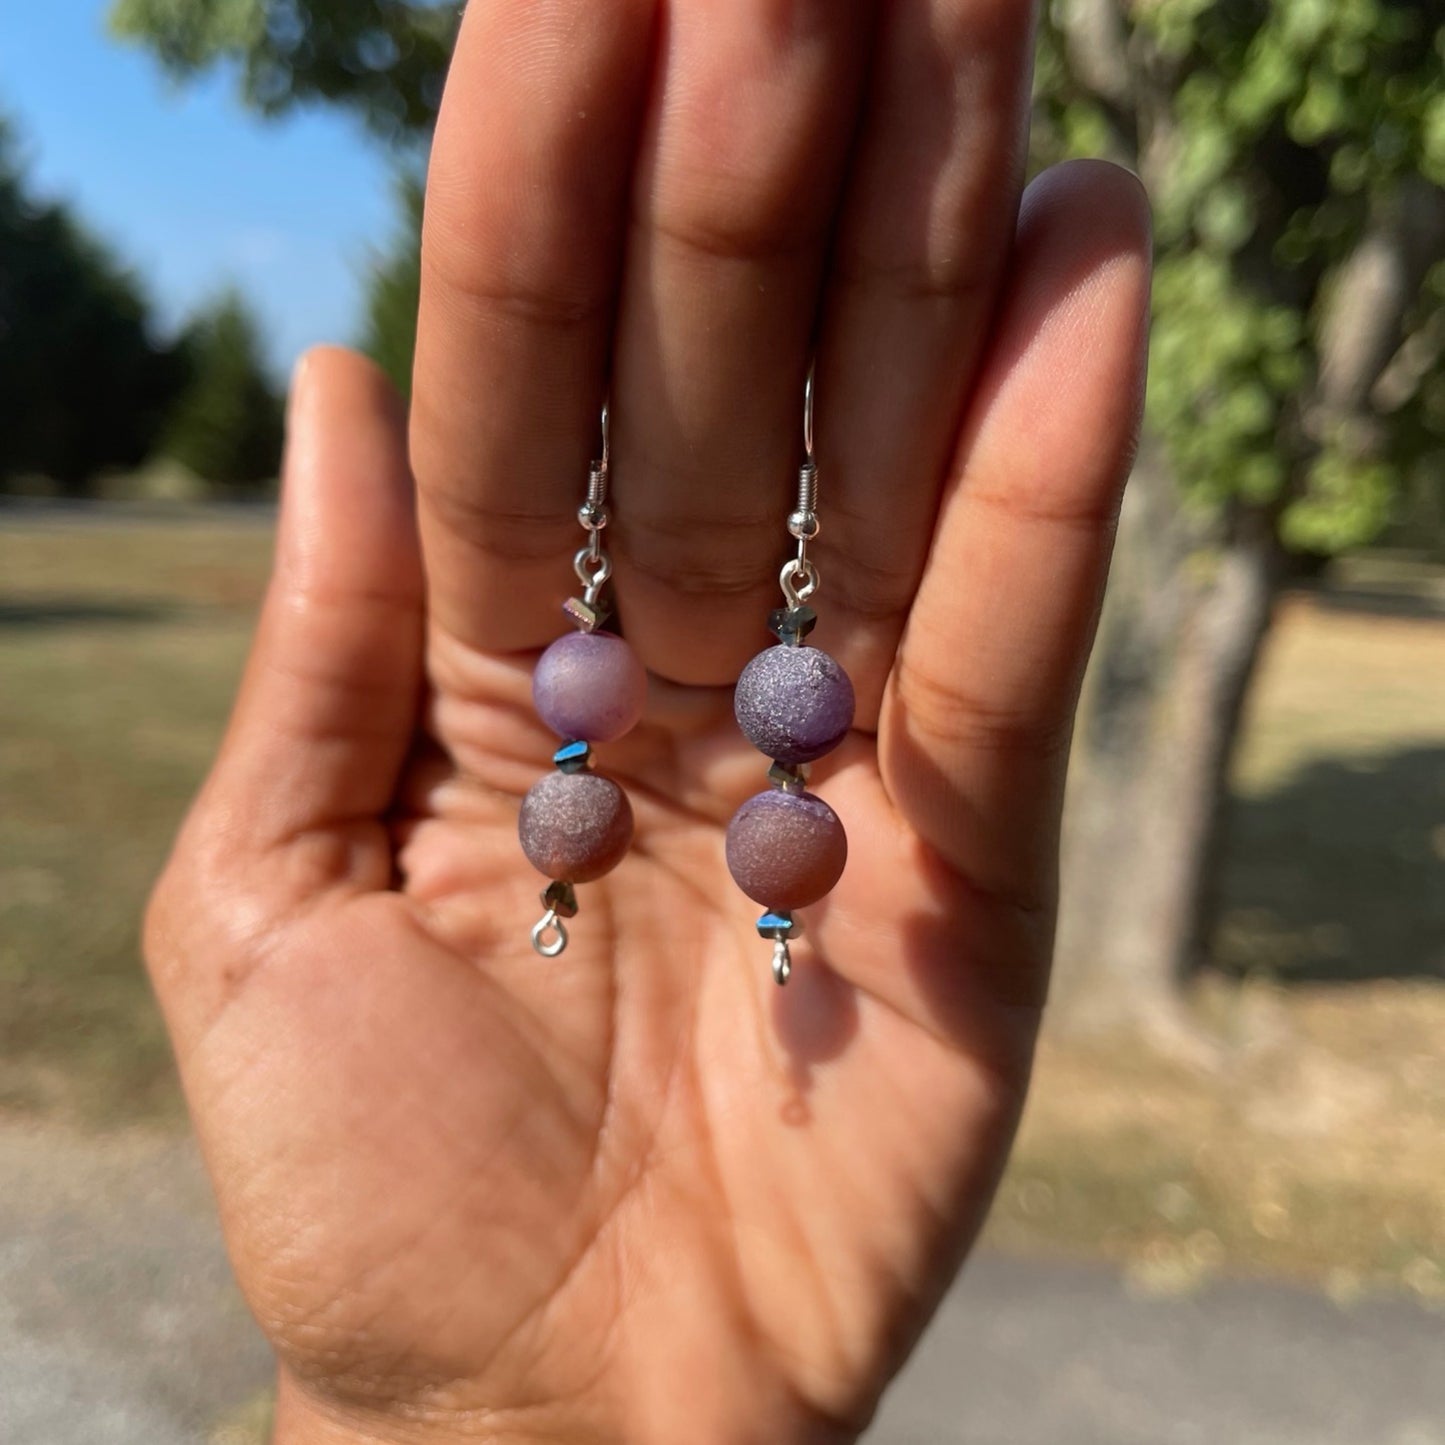 Lavender Agate Double Stack Earrings